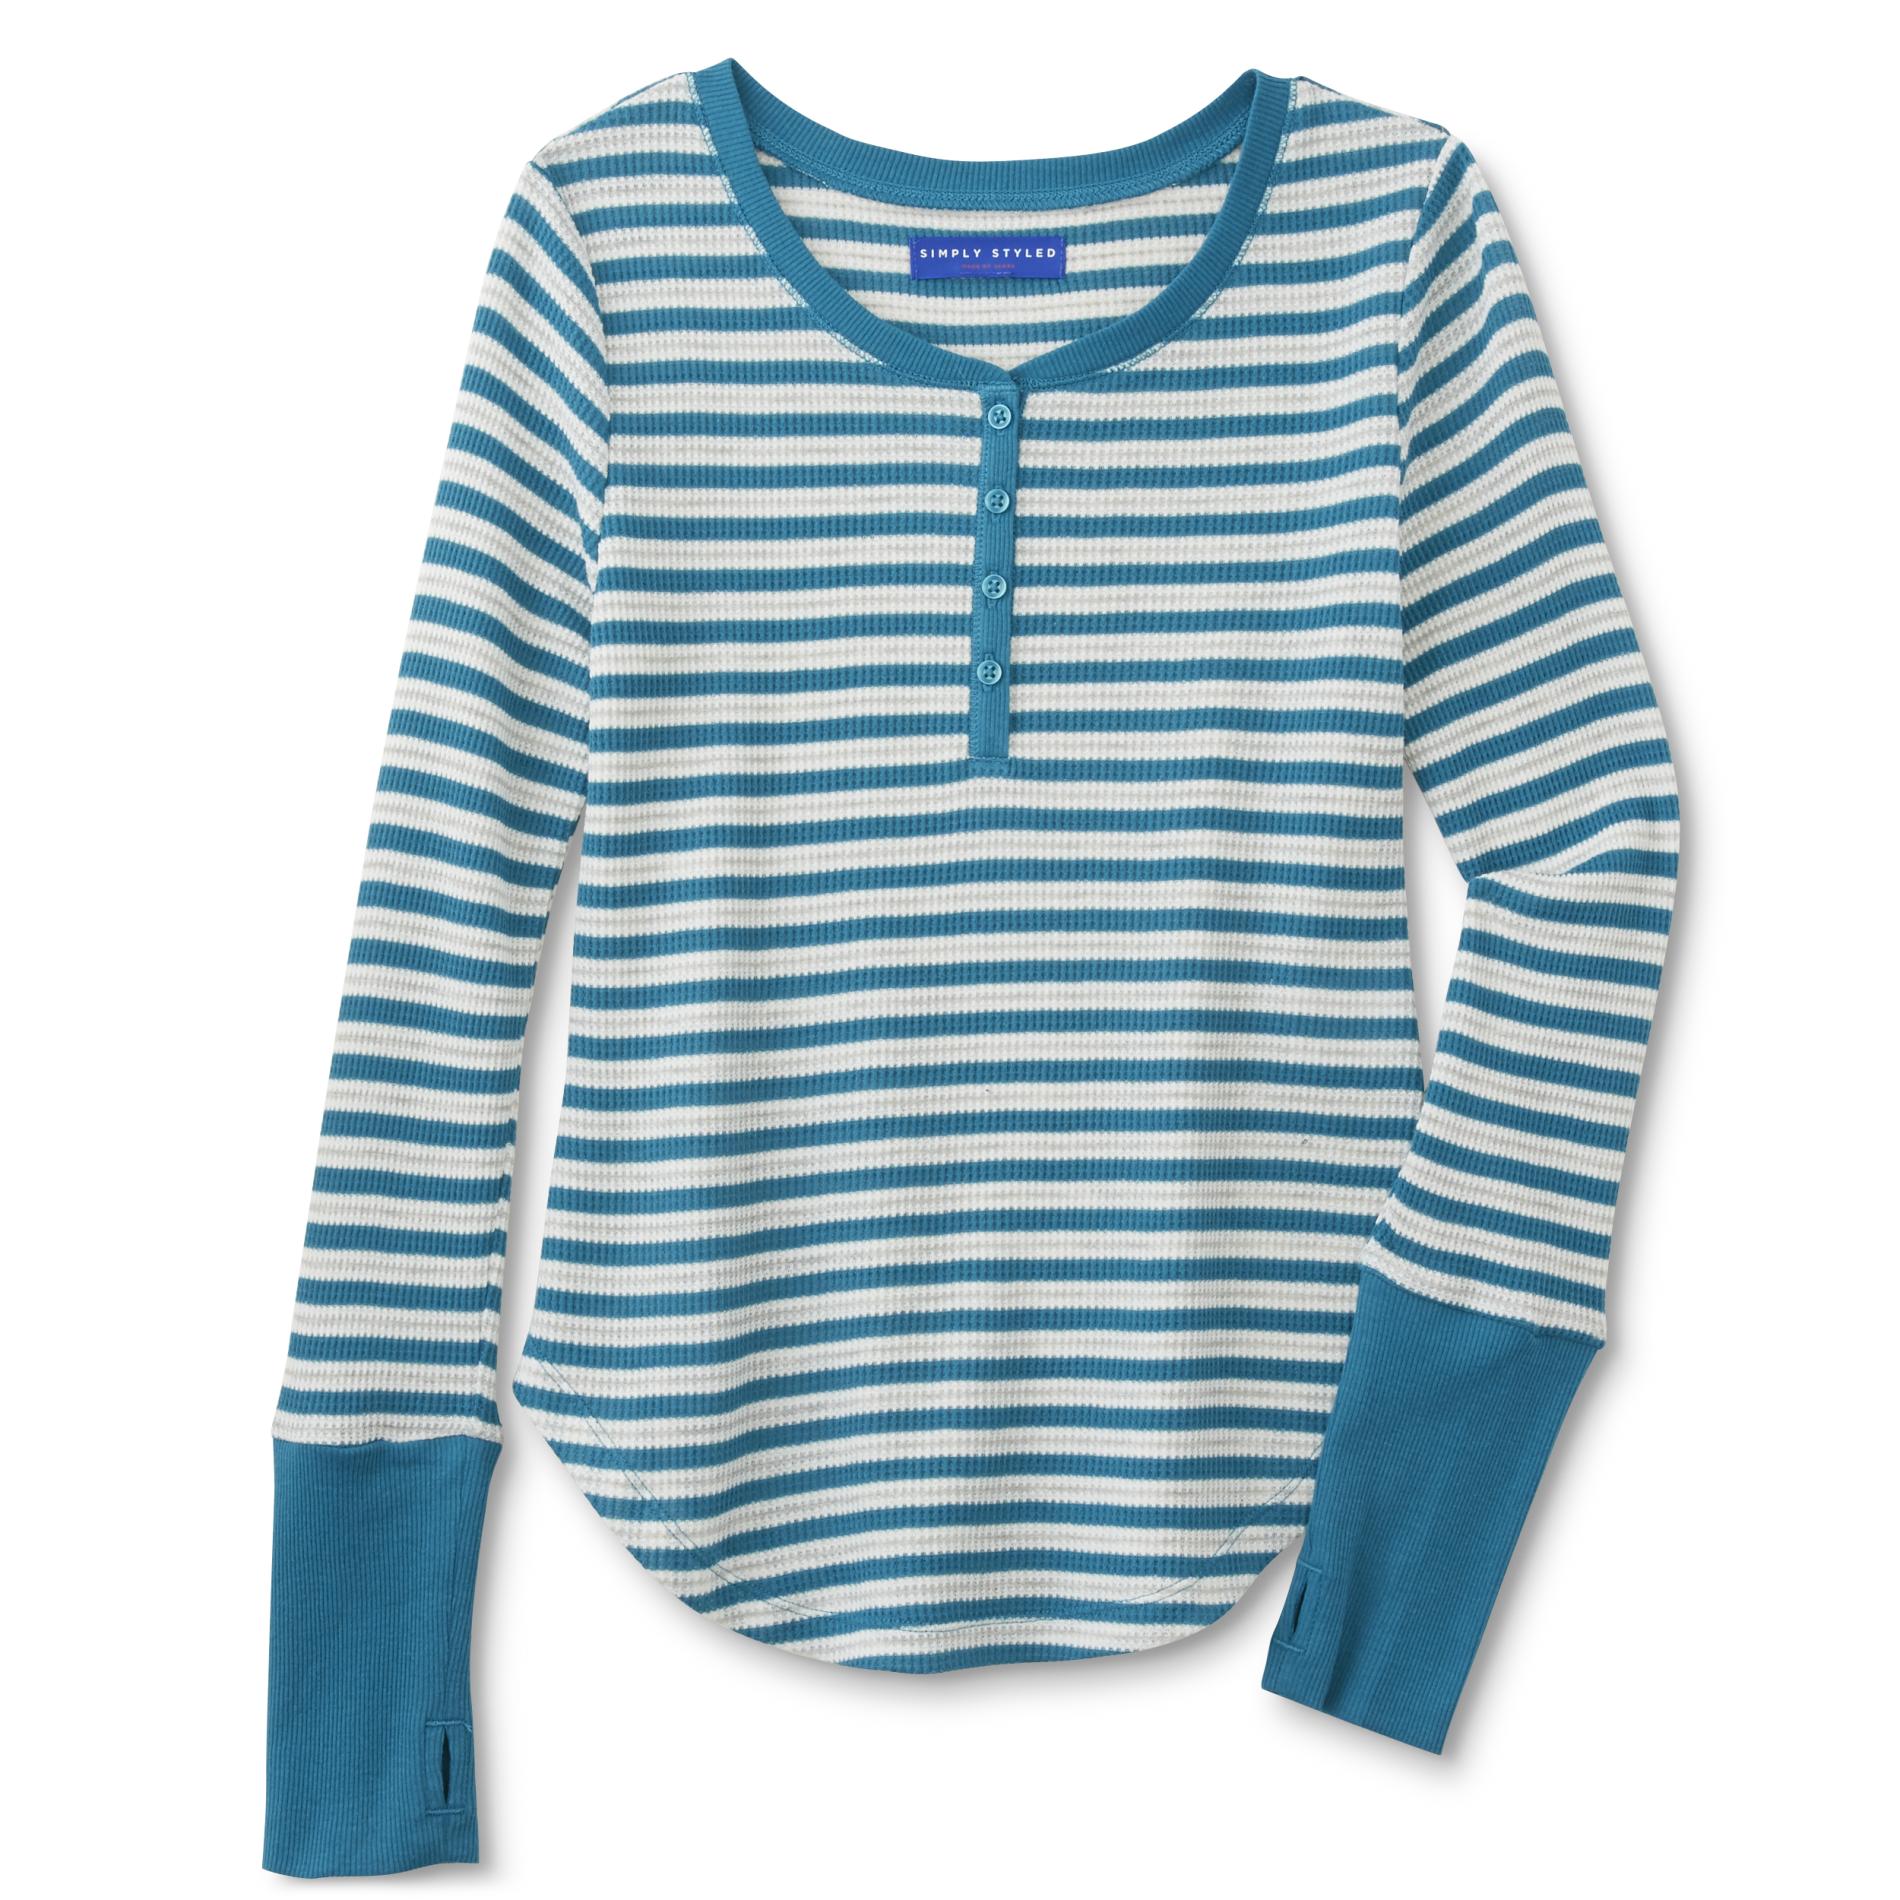 Simply Styled Girl's Thermal Henley Shirt - Striped